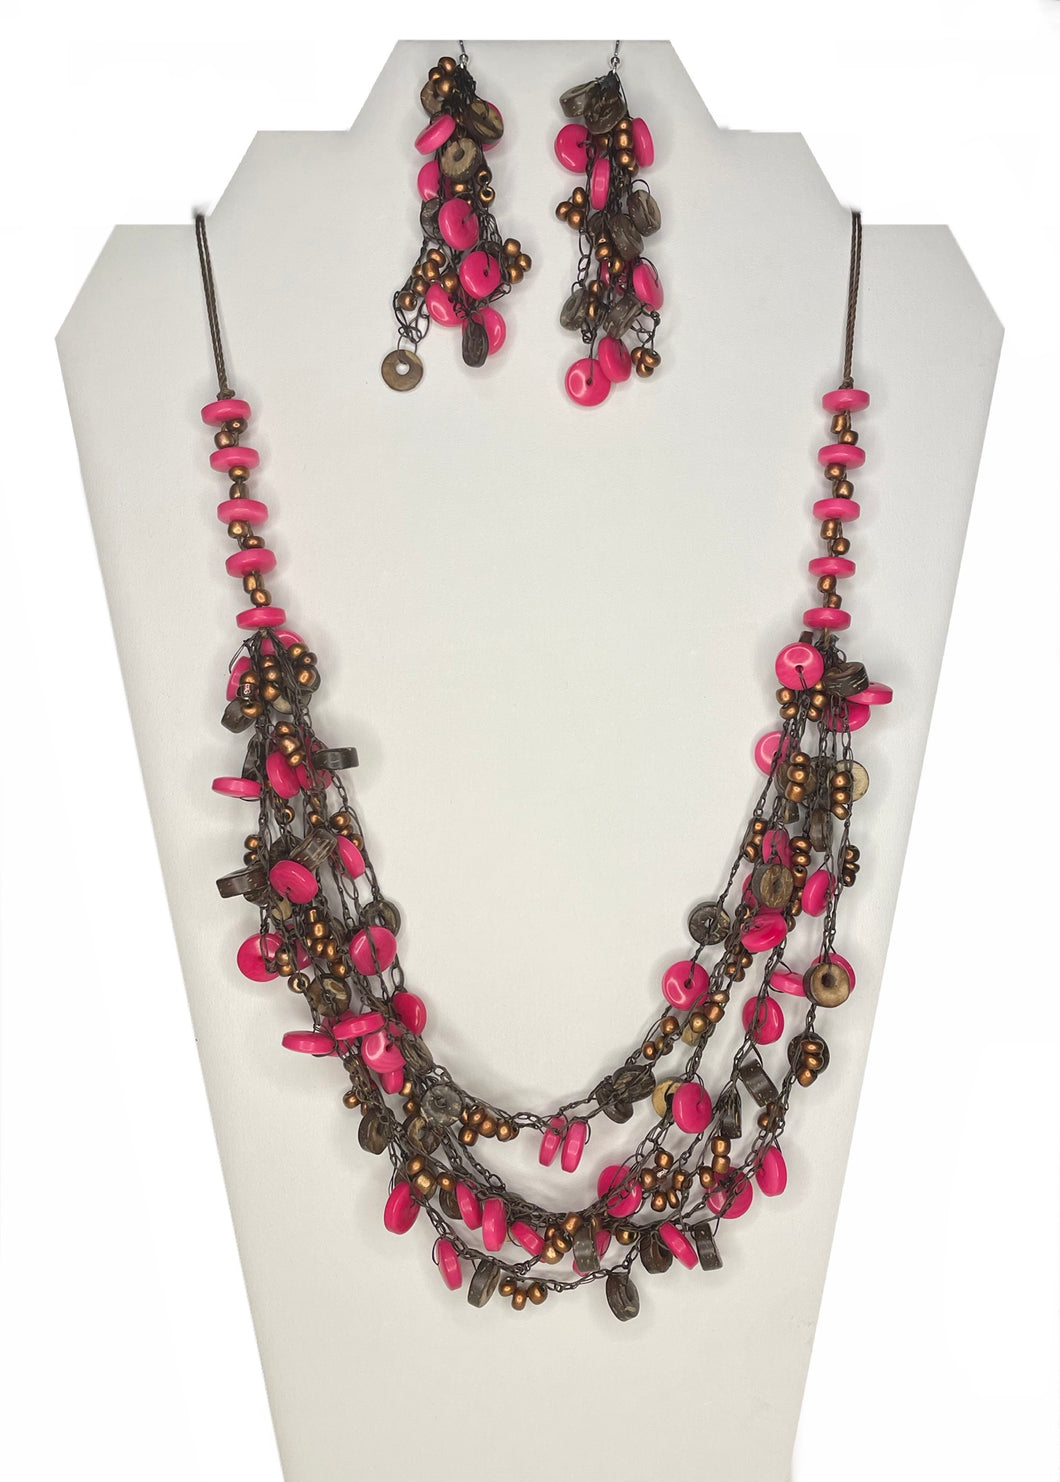 Pink Tagua Nut and Coconut Beads Adjustable Necklace and Earrings set